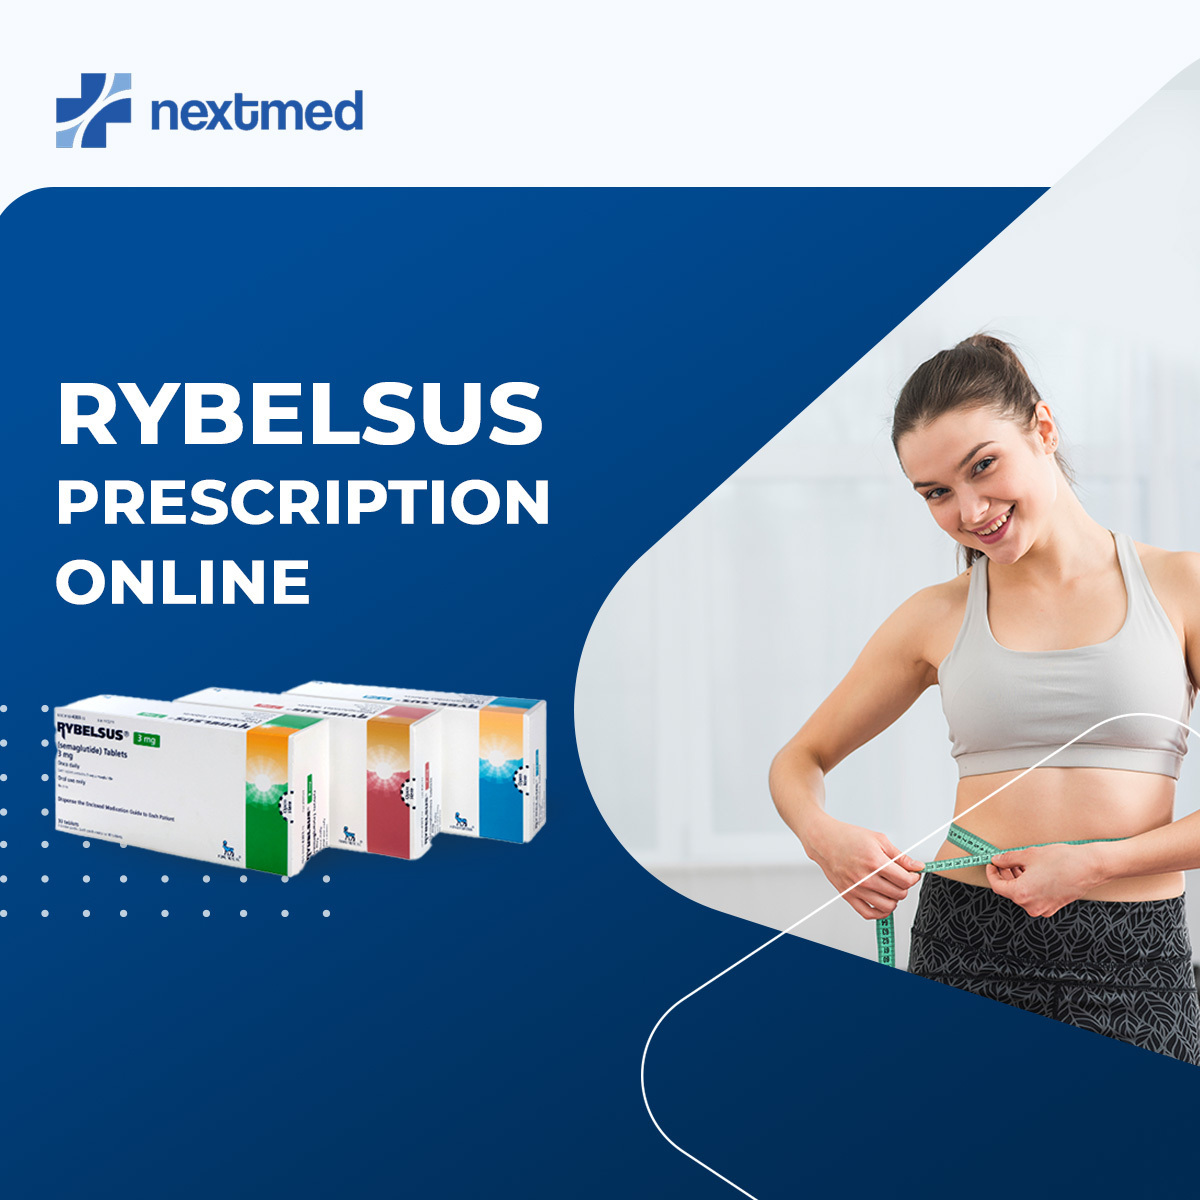 Managing Diabetes from Home: Rybelsus Prescription Online Makes it Possible